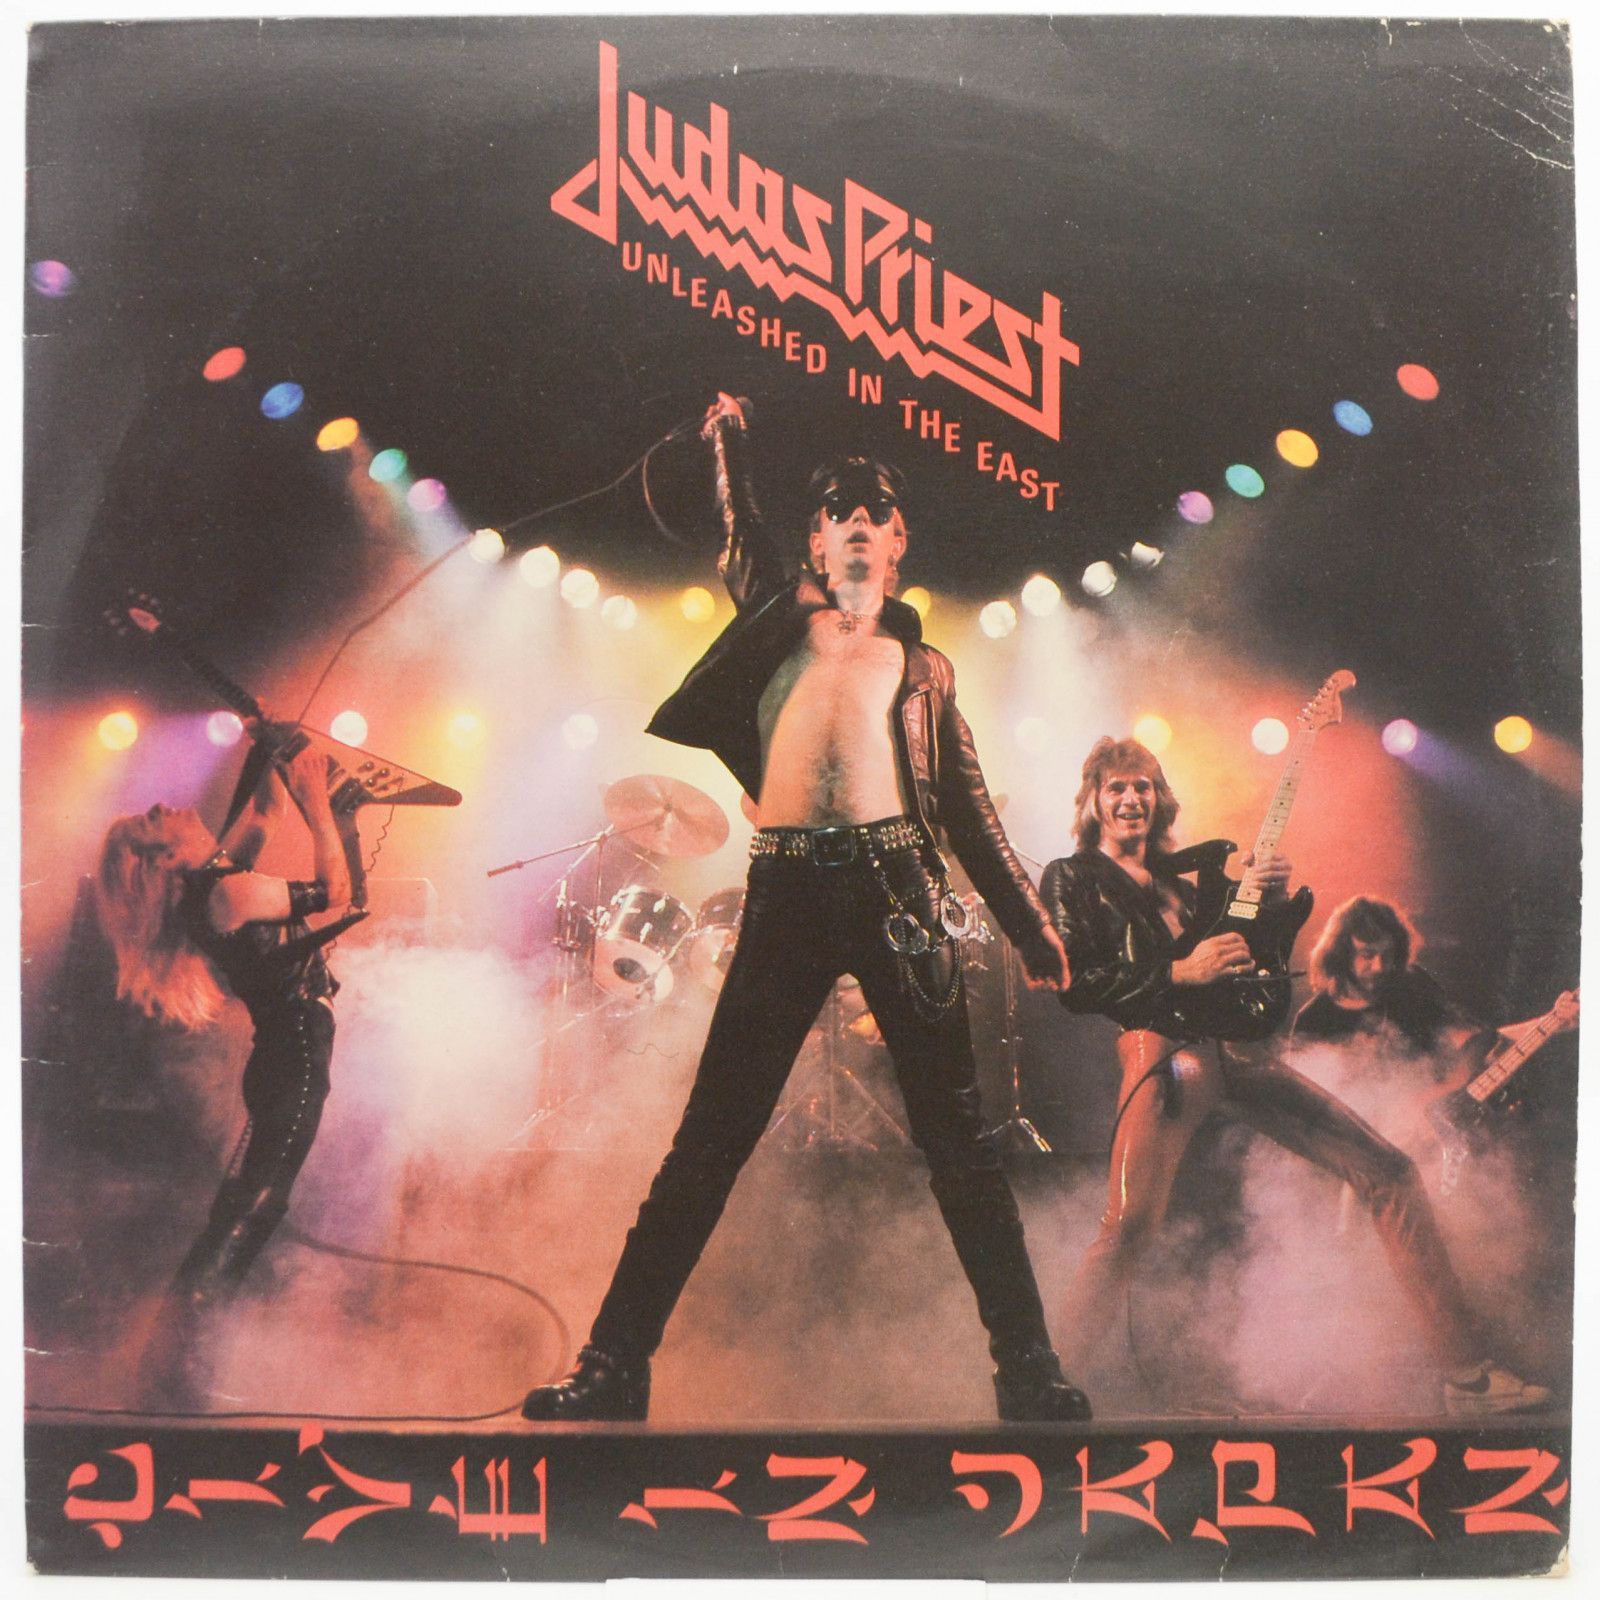 Judas Priest — Unleashed In The East (Live In Japan), 1979